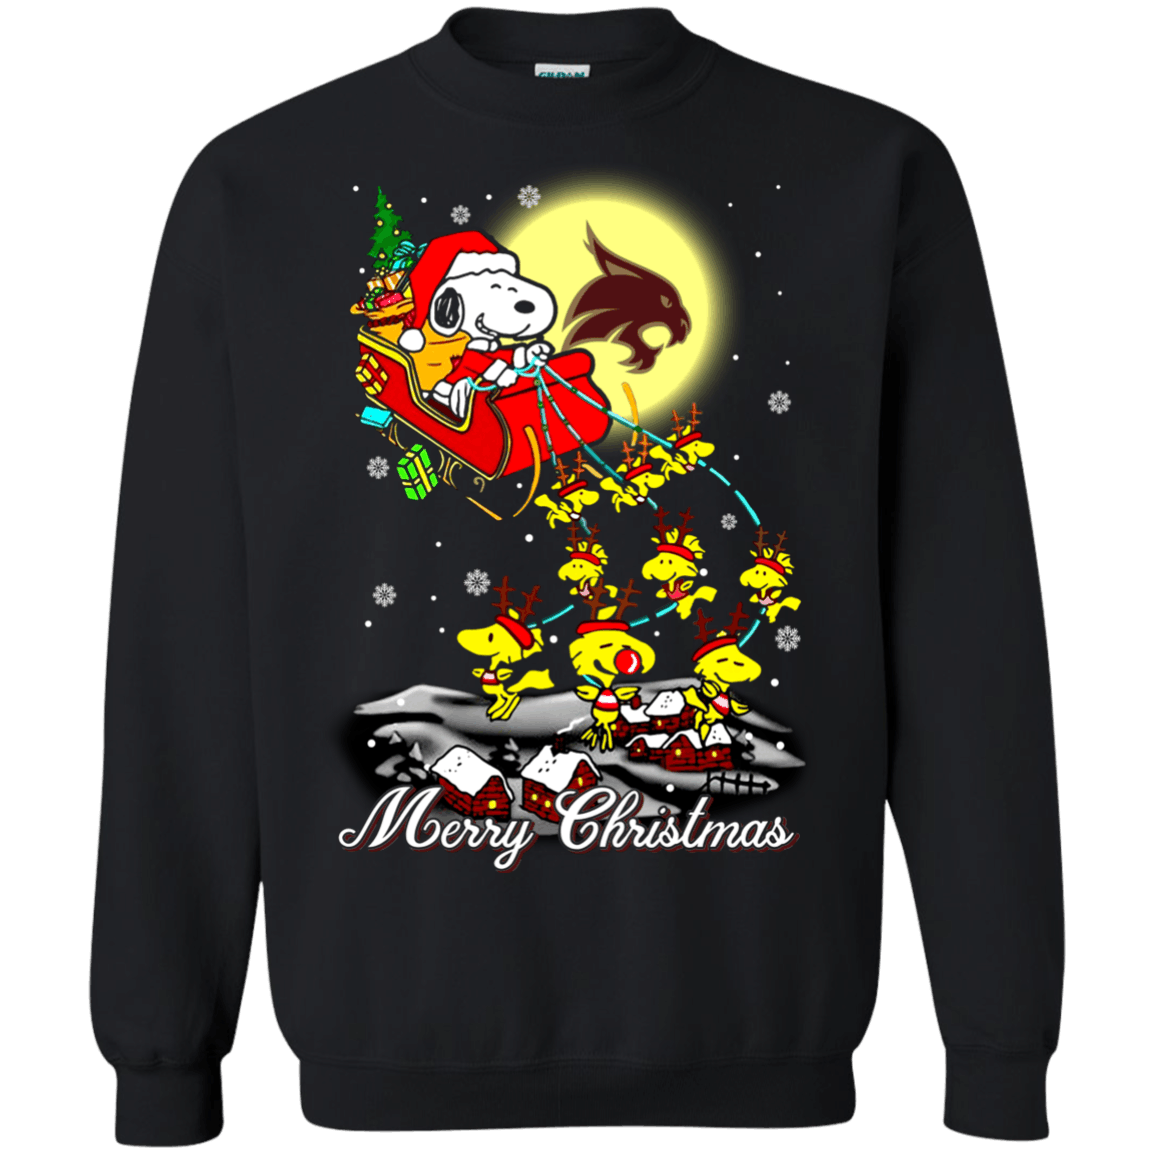 Blithesome Texas State Bobcats Ugly Christmas Sweater 2023S Santa Claus With Sleigh And Snoopy Sweatshirts